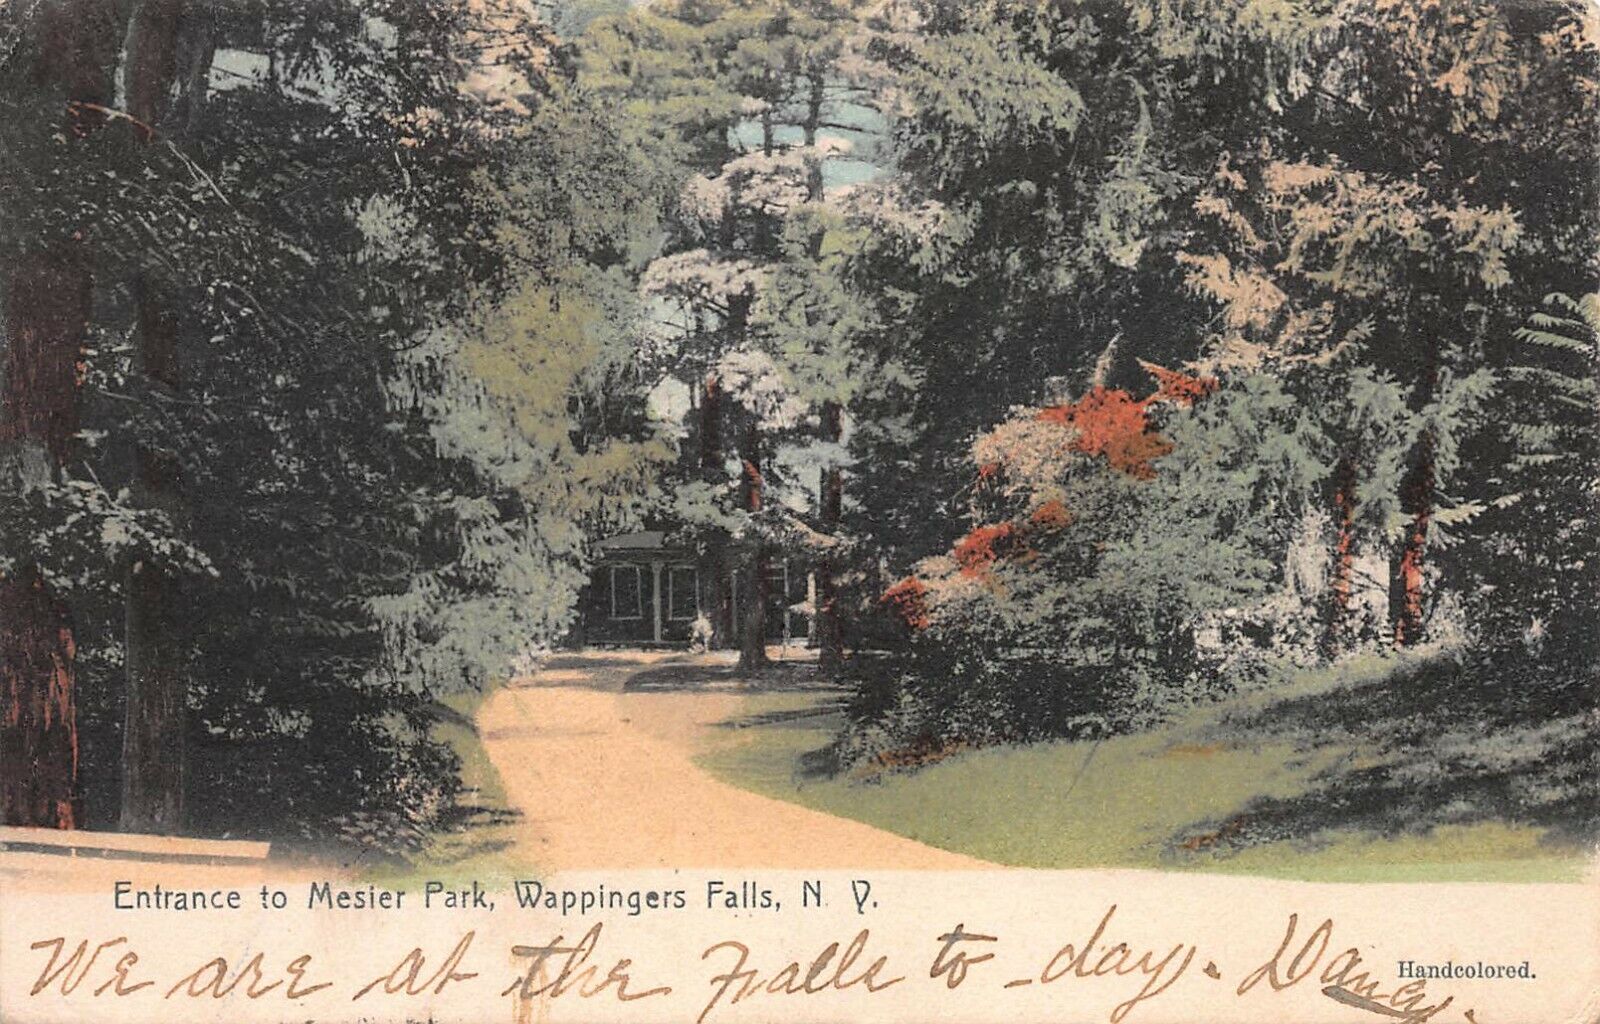 Mesier Park, Wappingers Falls, N.Y., Early Hand Colored Postcard, Used in 1906